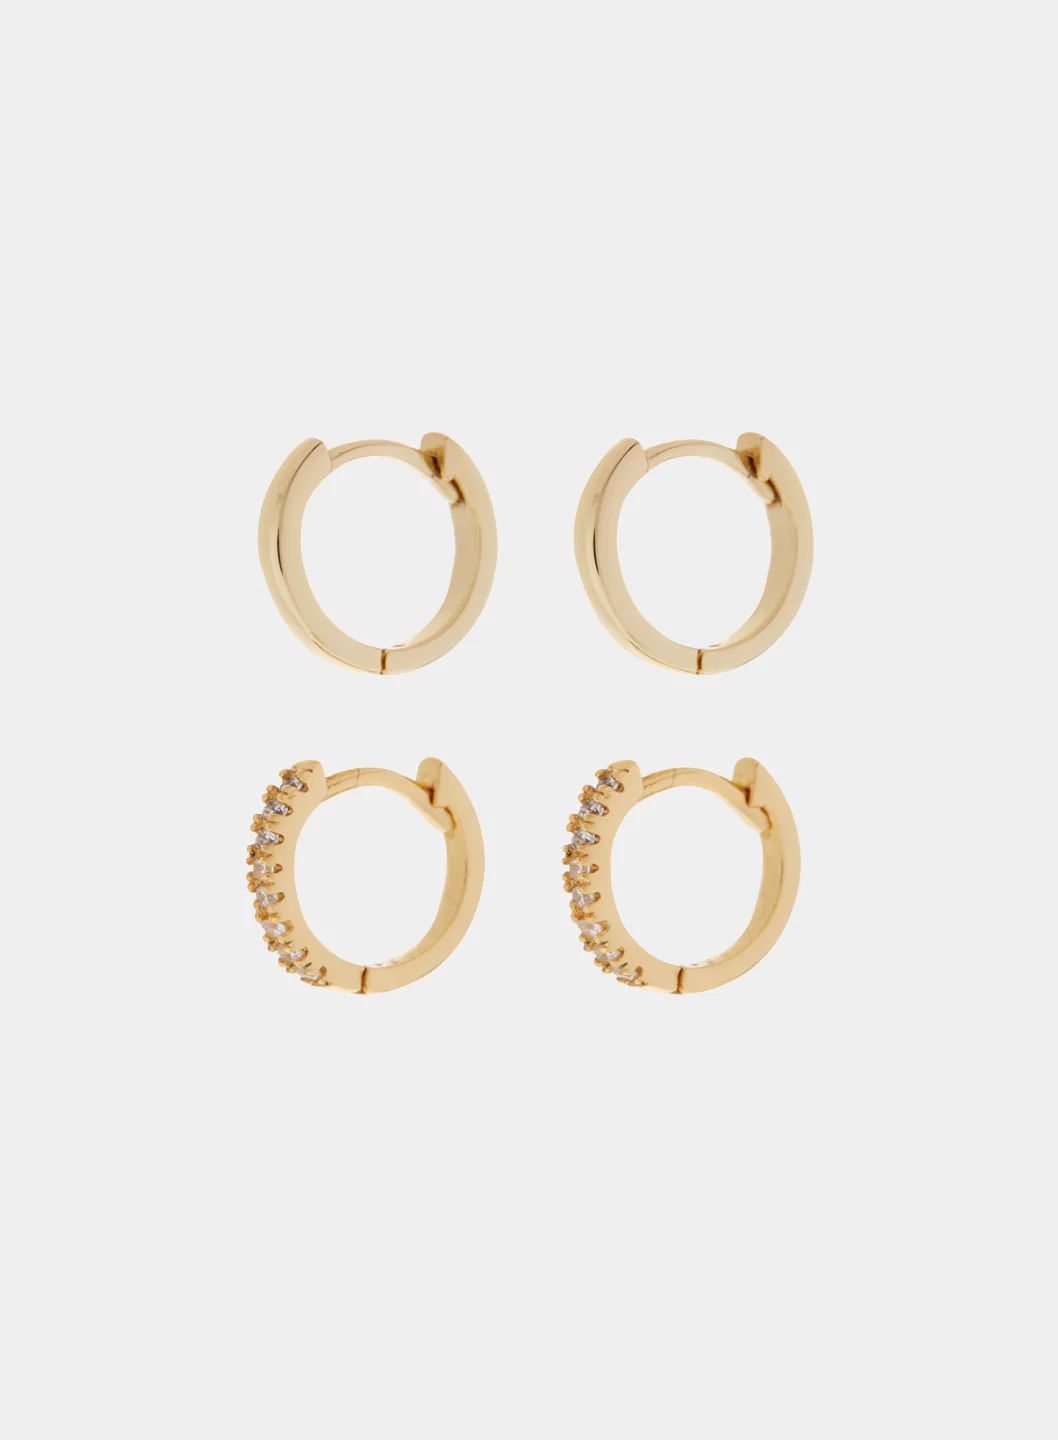 Luv AJ Sorrento Hoops Earring in Silver Lord & Taylor | Lord & Taylor